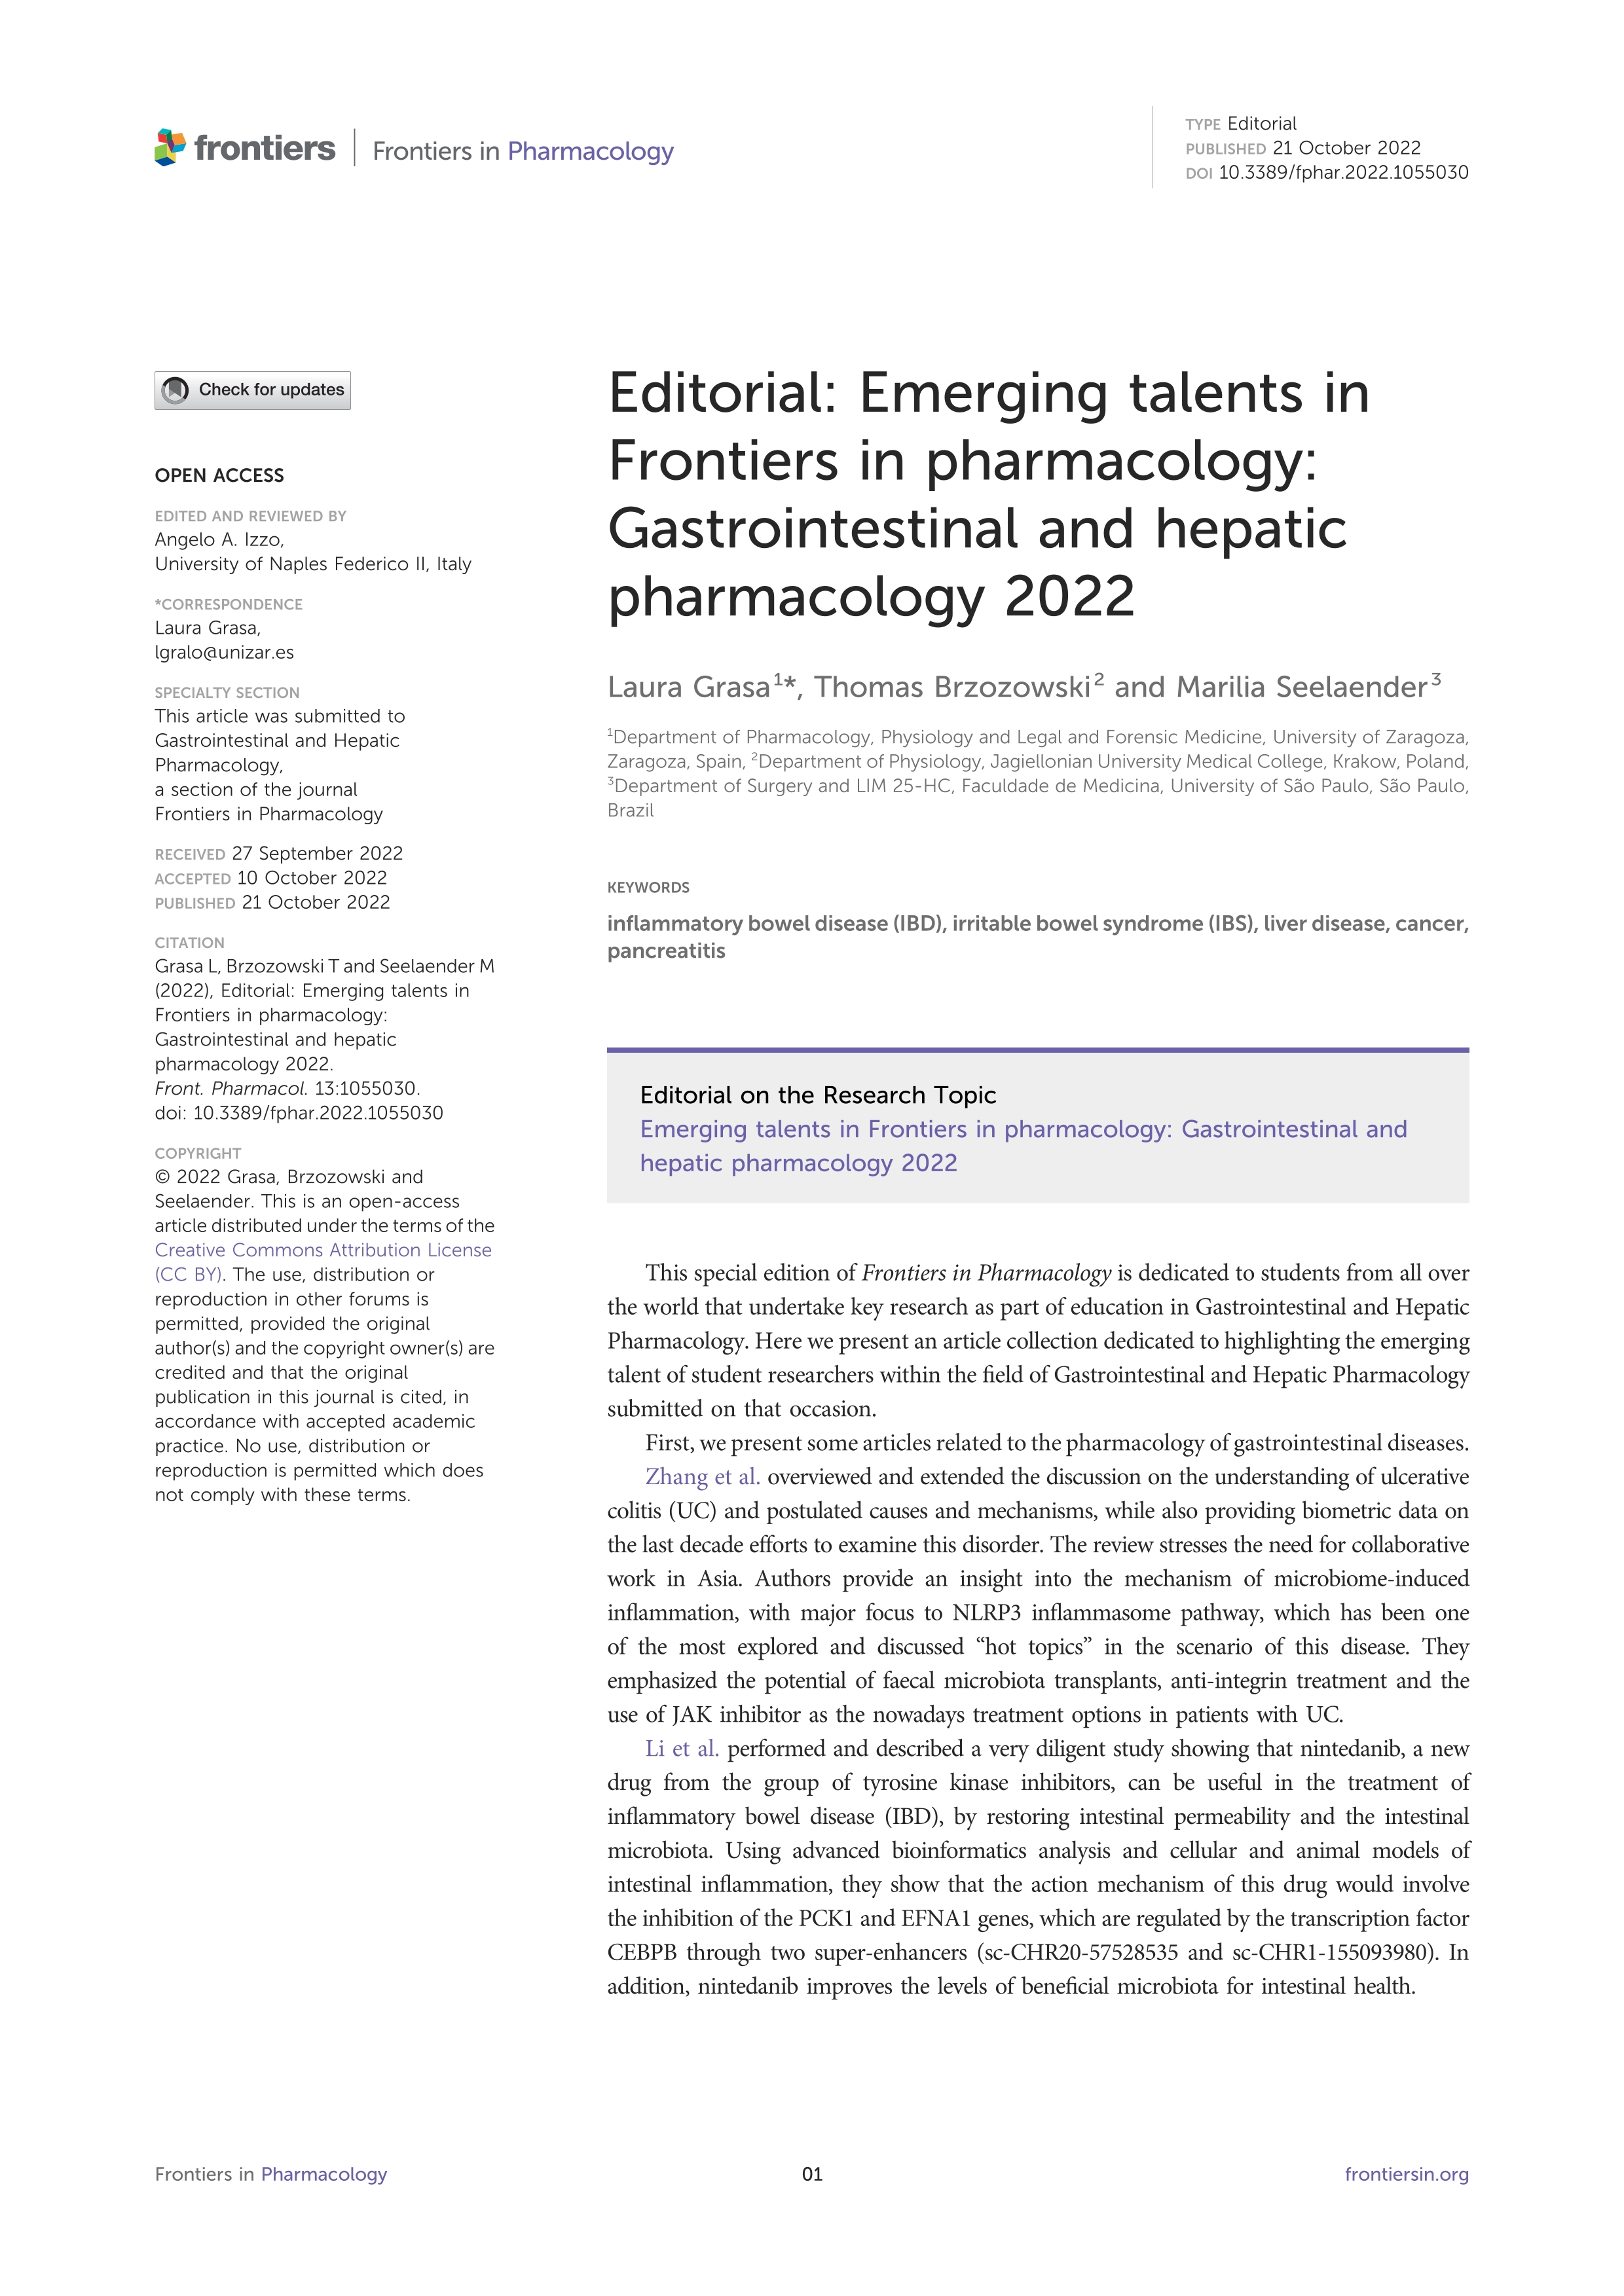 Editorial: emerging talents in frontiers in pharmacology: gastrointestinal and hepatic pharmacology 2022